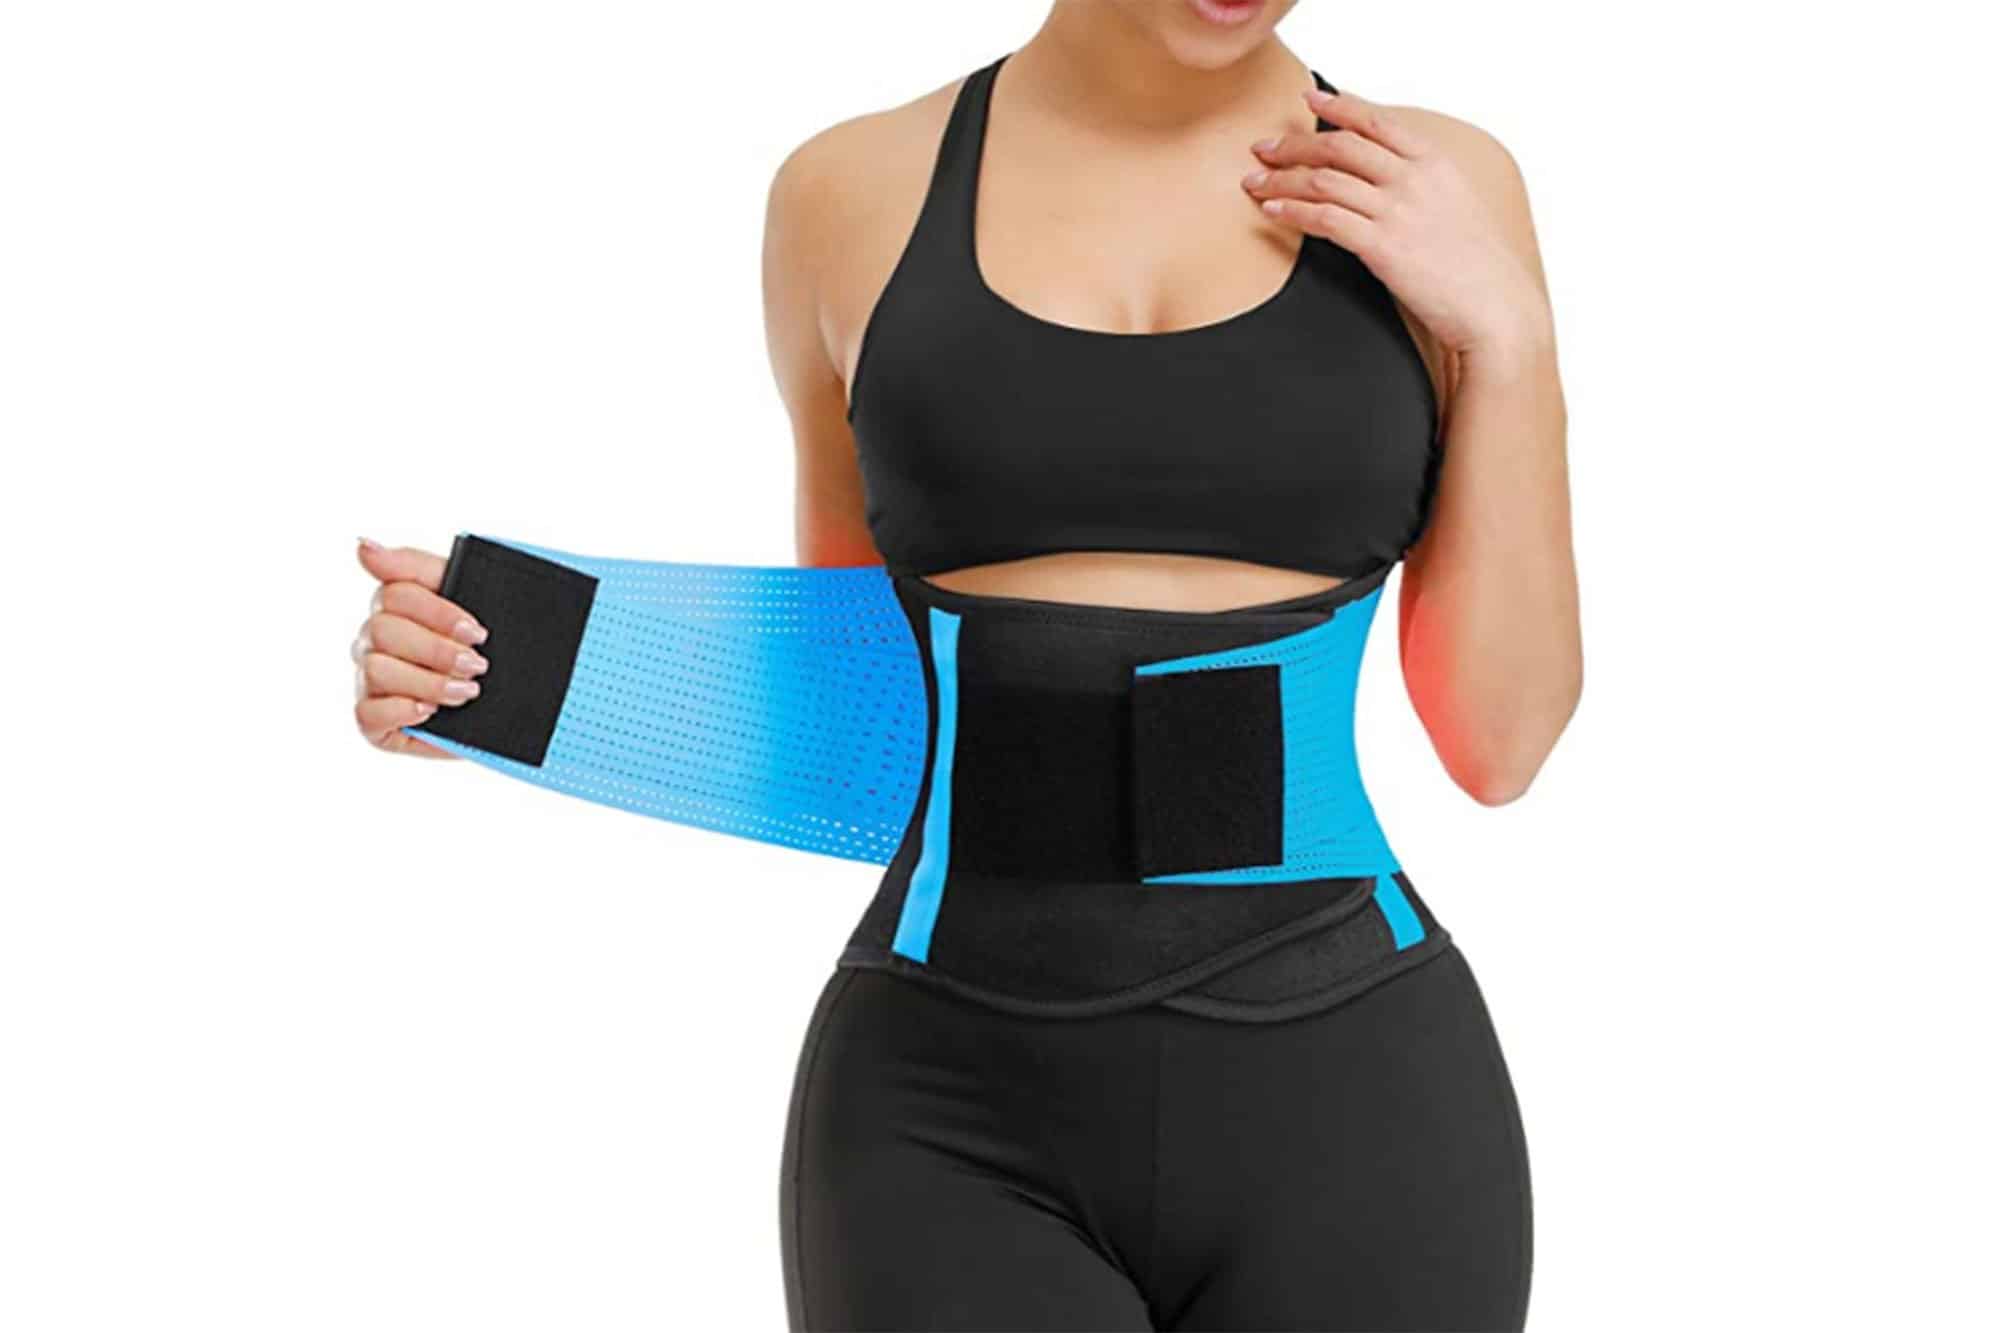 Can you get an hourglass figure with exercise and a waist trainer